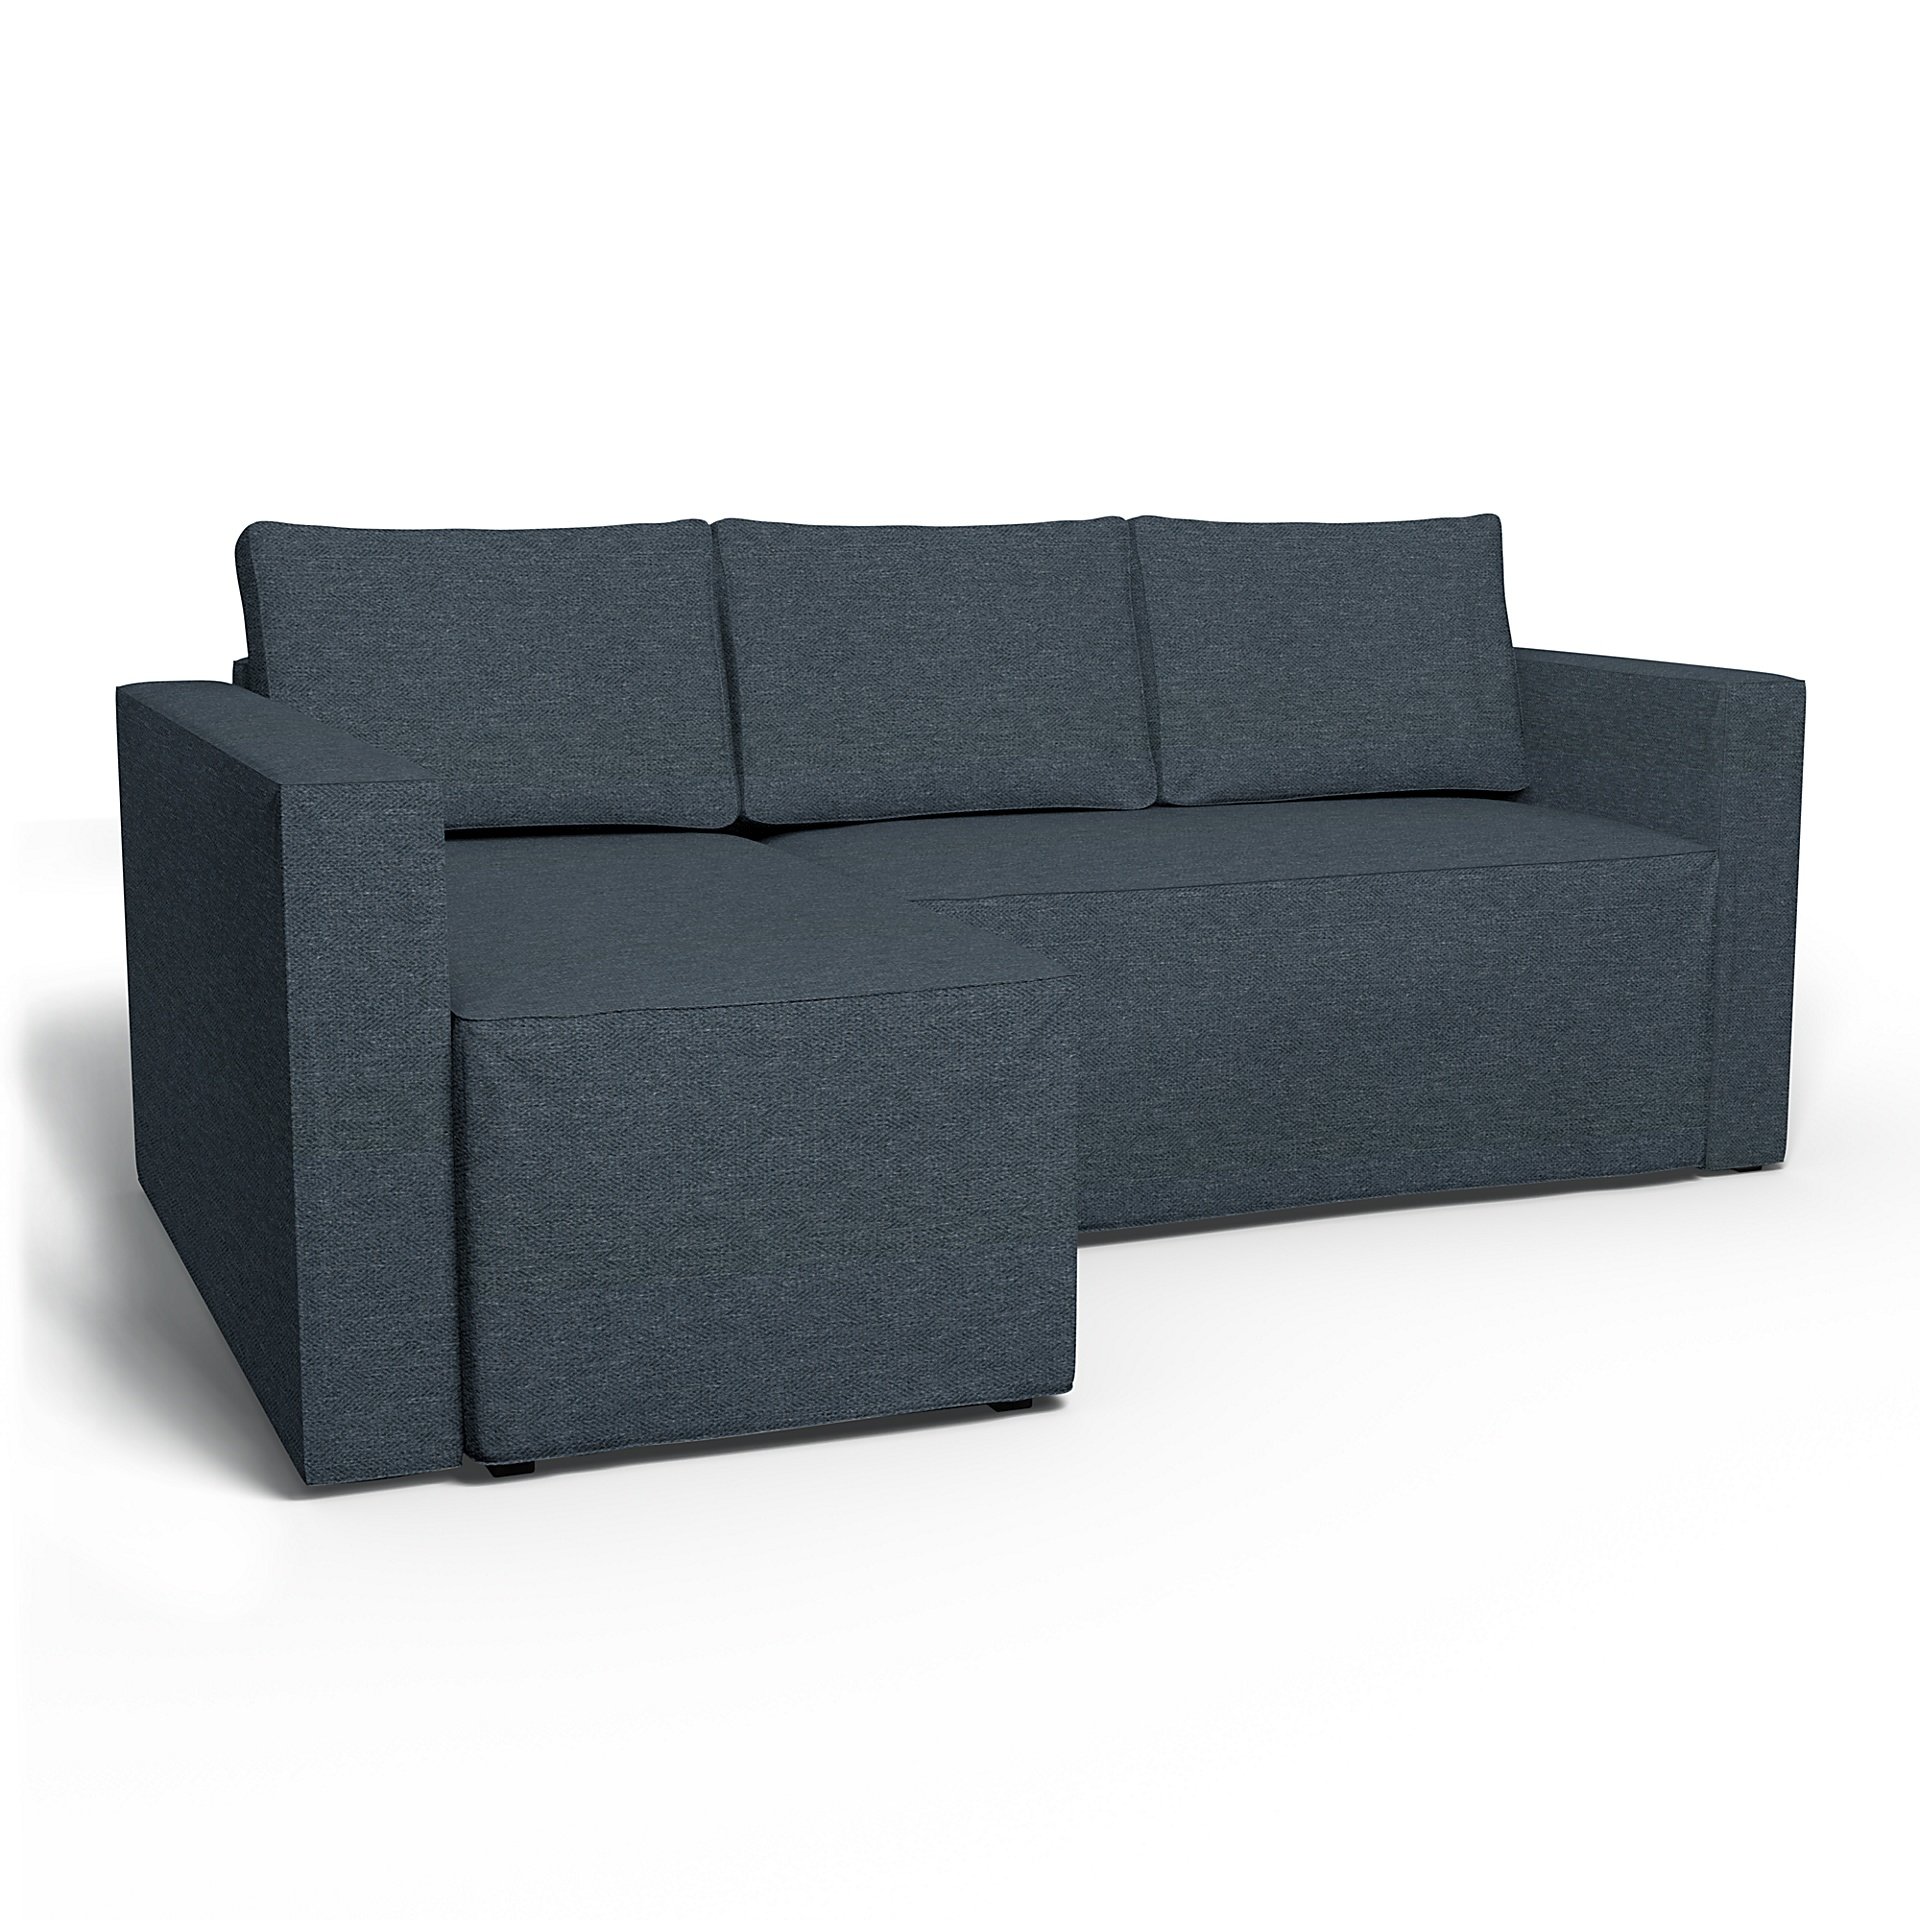 IKEA - Manstad Sofa Bed with Left Chaise Cover, Denim, Boucle & Texture - Bemz